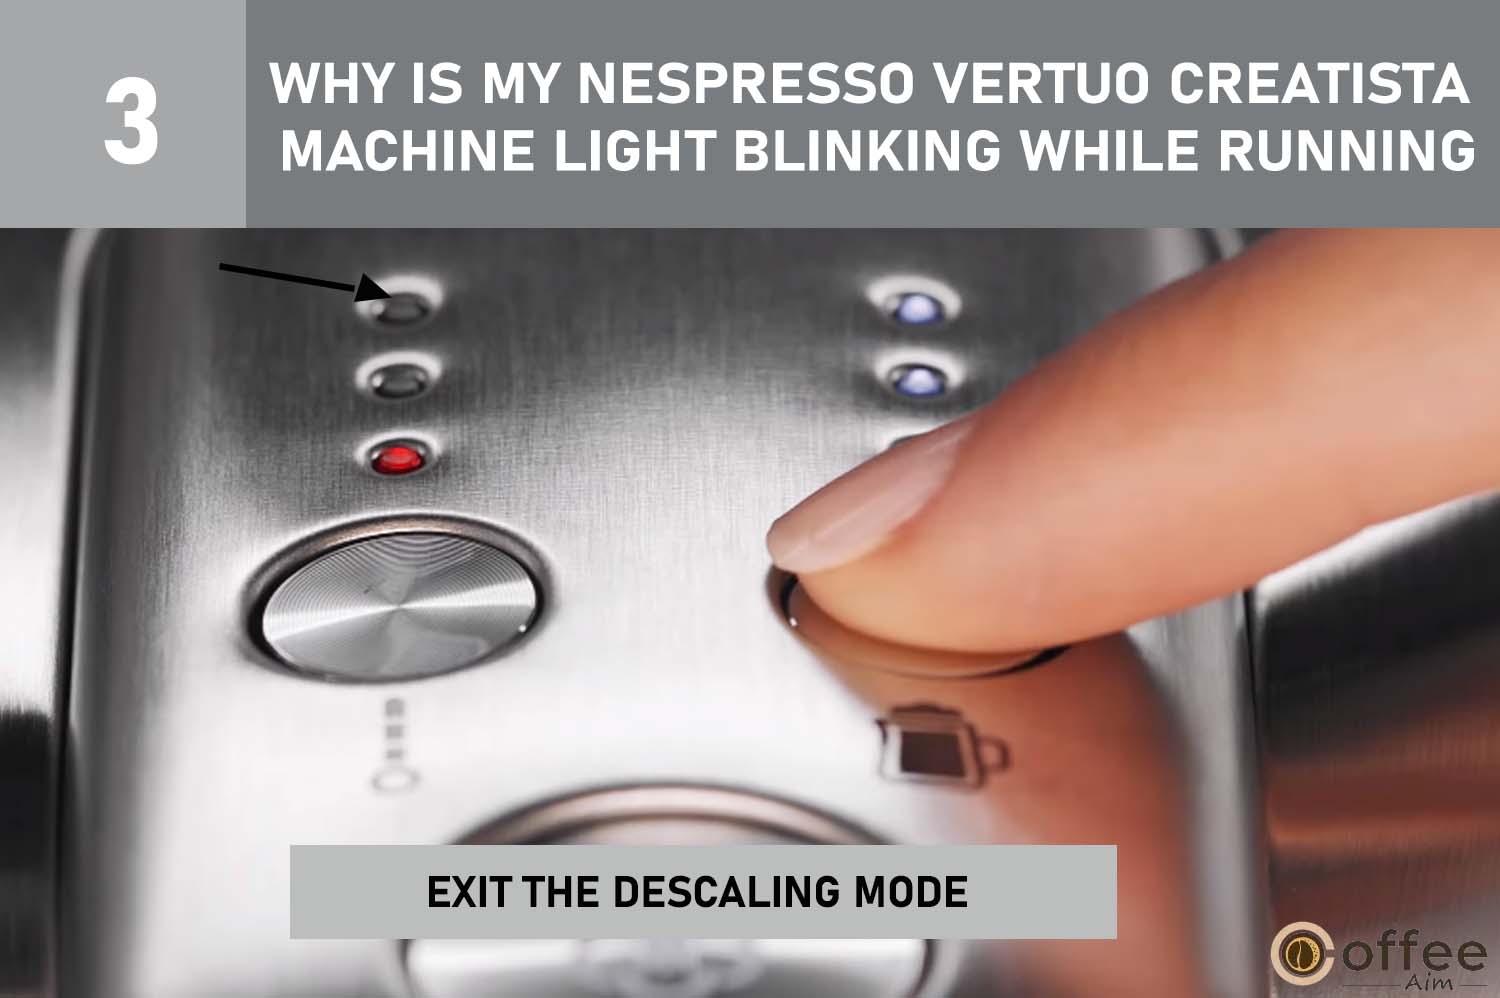 To exit descaling mode on the Nespresso Vertuo Creatista, follow the steps shown in the image for troubleshooting.